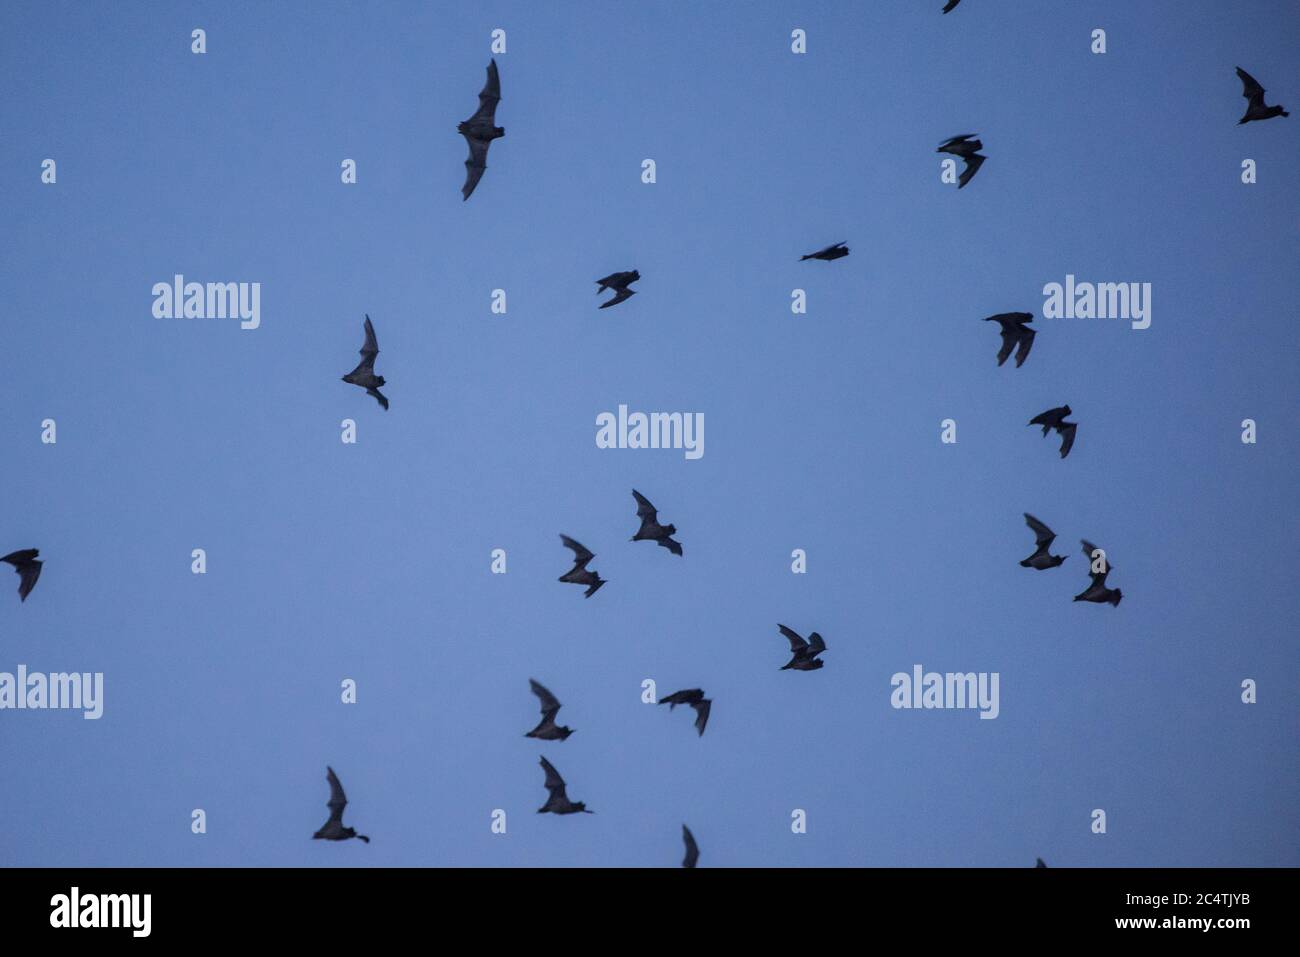 Mexican free-tailed bats (Tadarida brasiliensis) flying through the sky at dusk as it begins to get dark at the Yolo causeway near Davis, California. Stock Photo